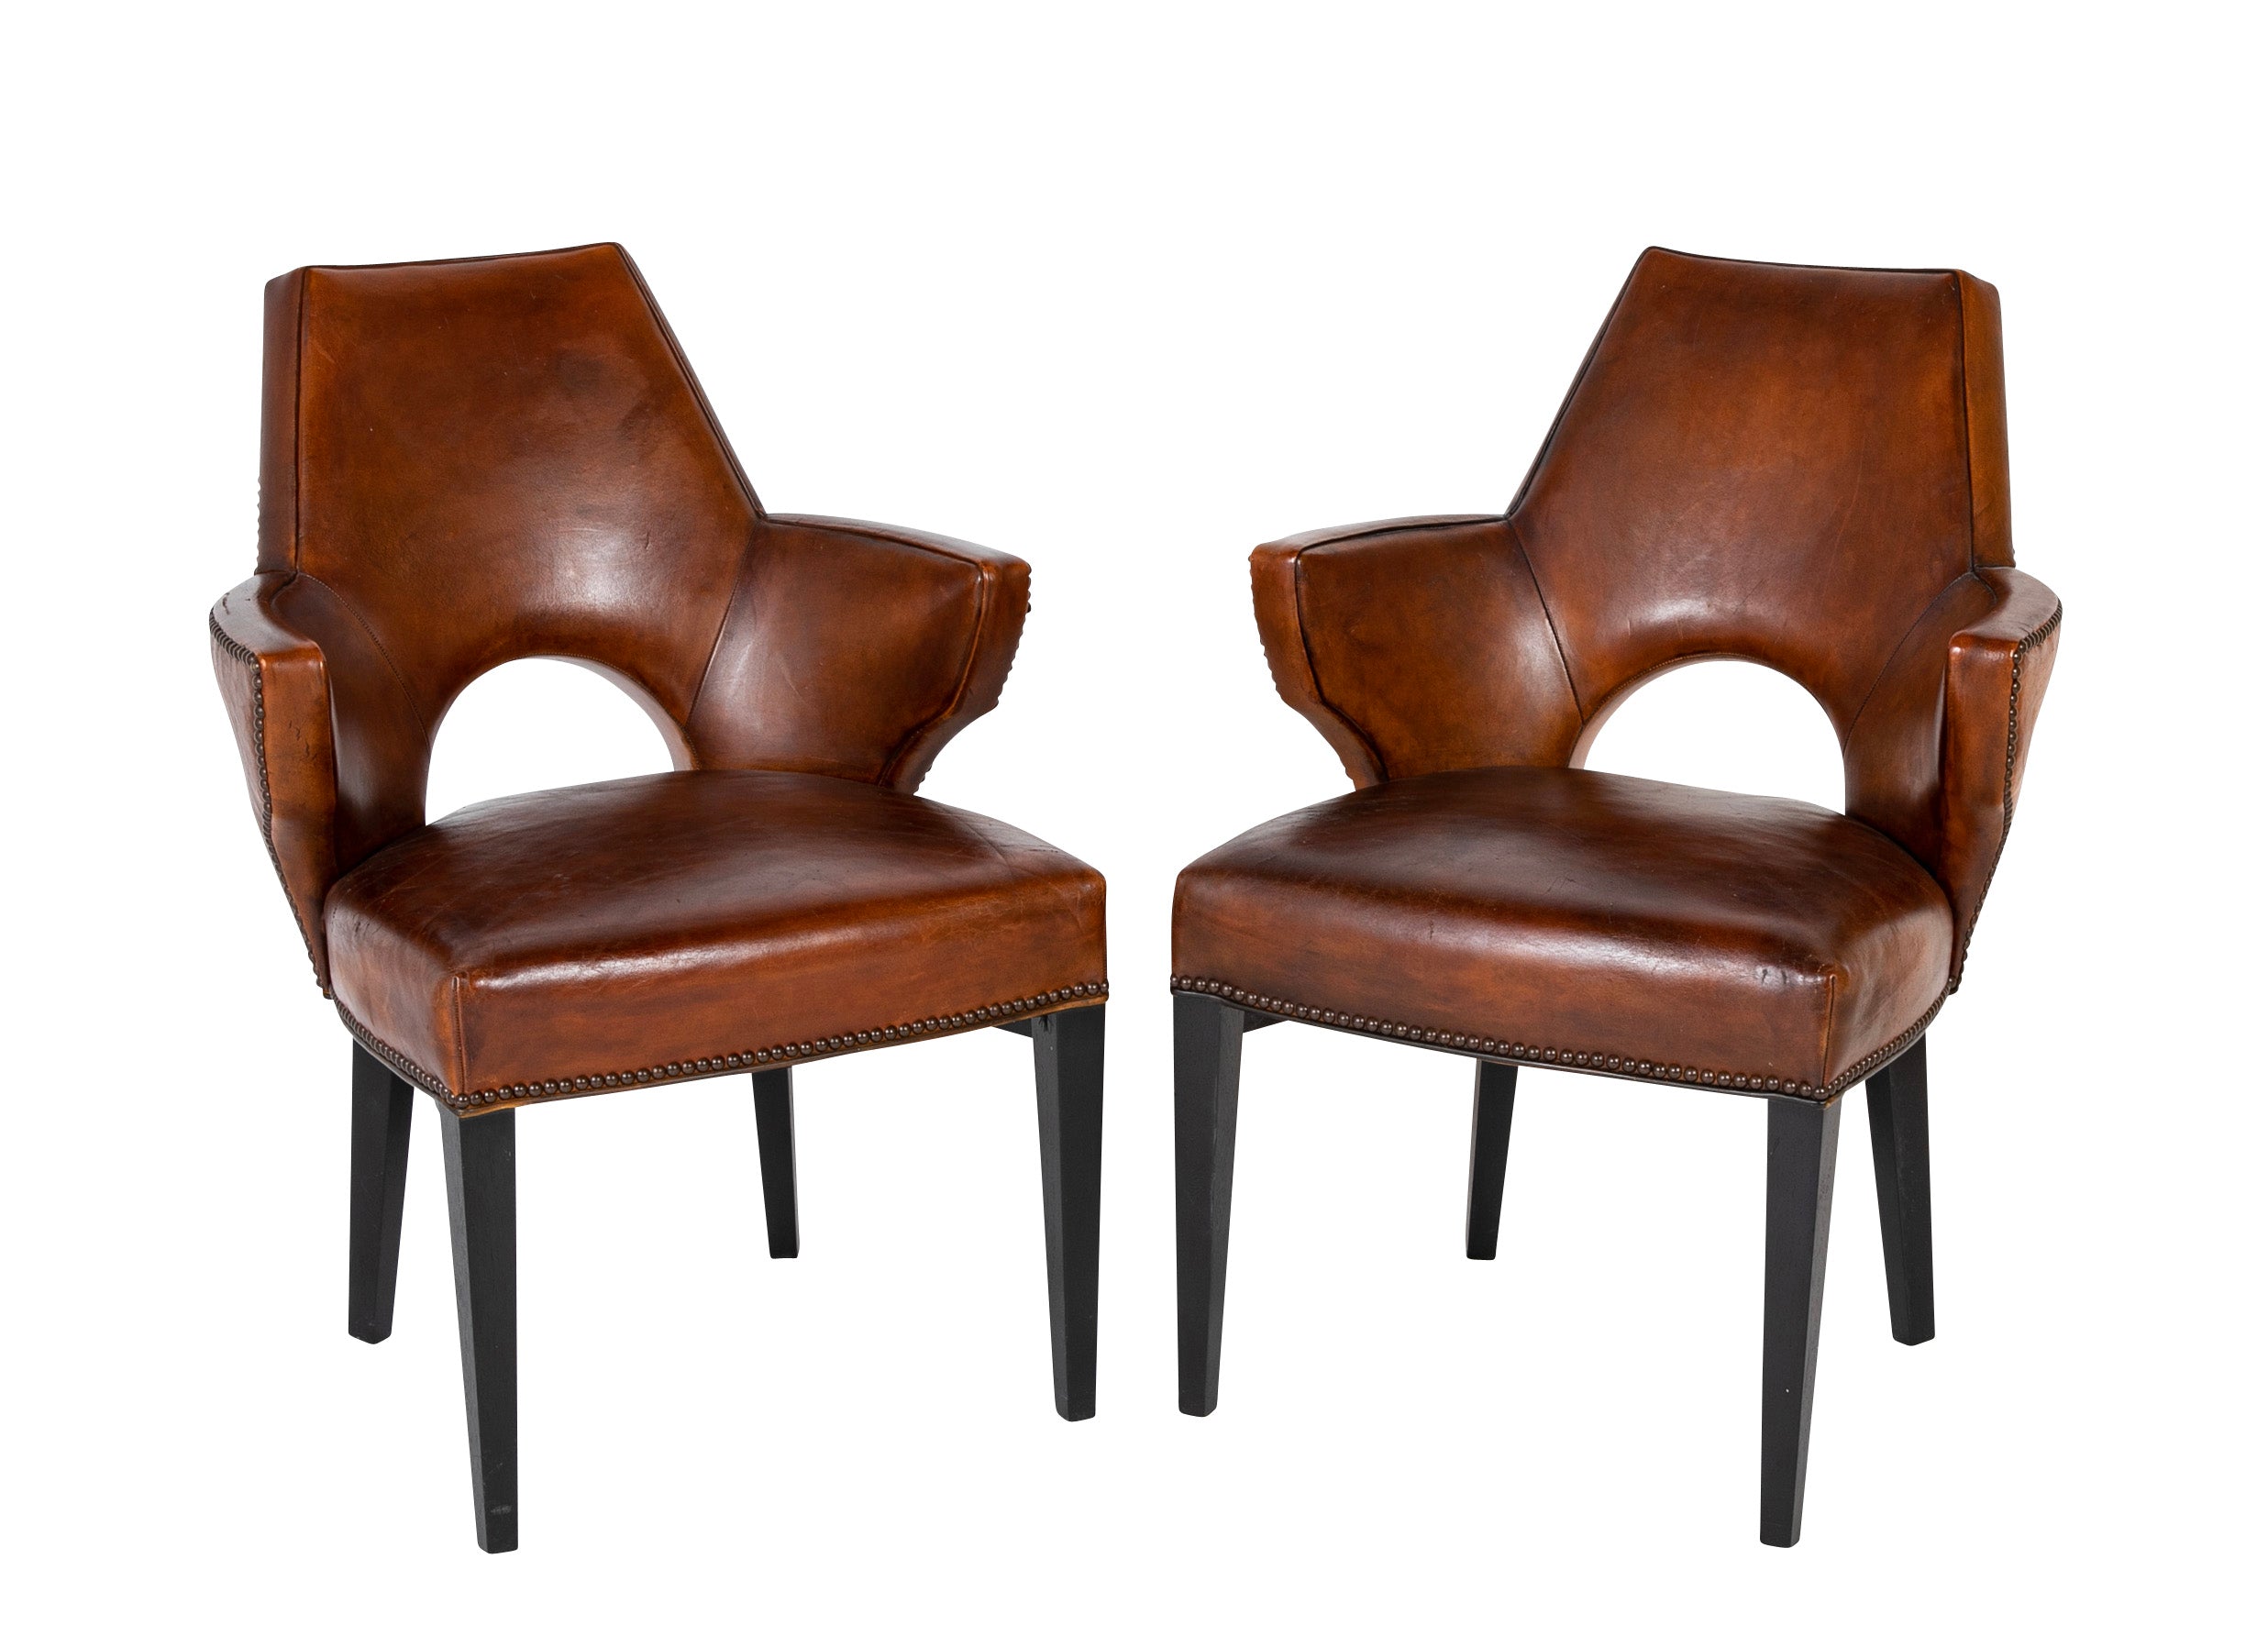 A Pair of Art Deco Style Leather Armchairs